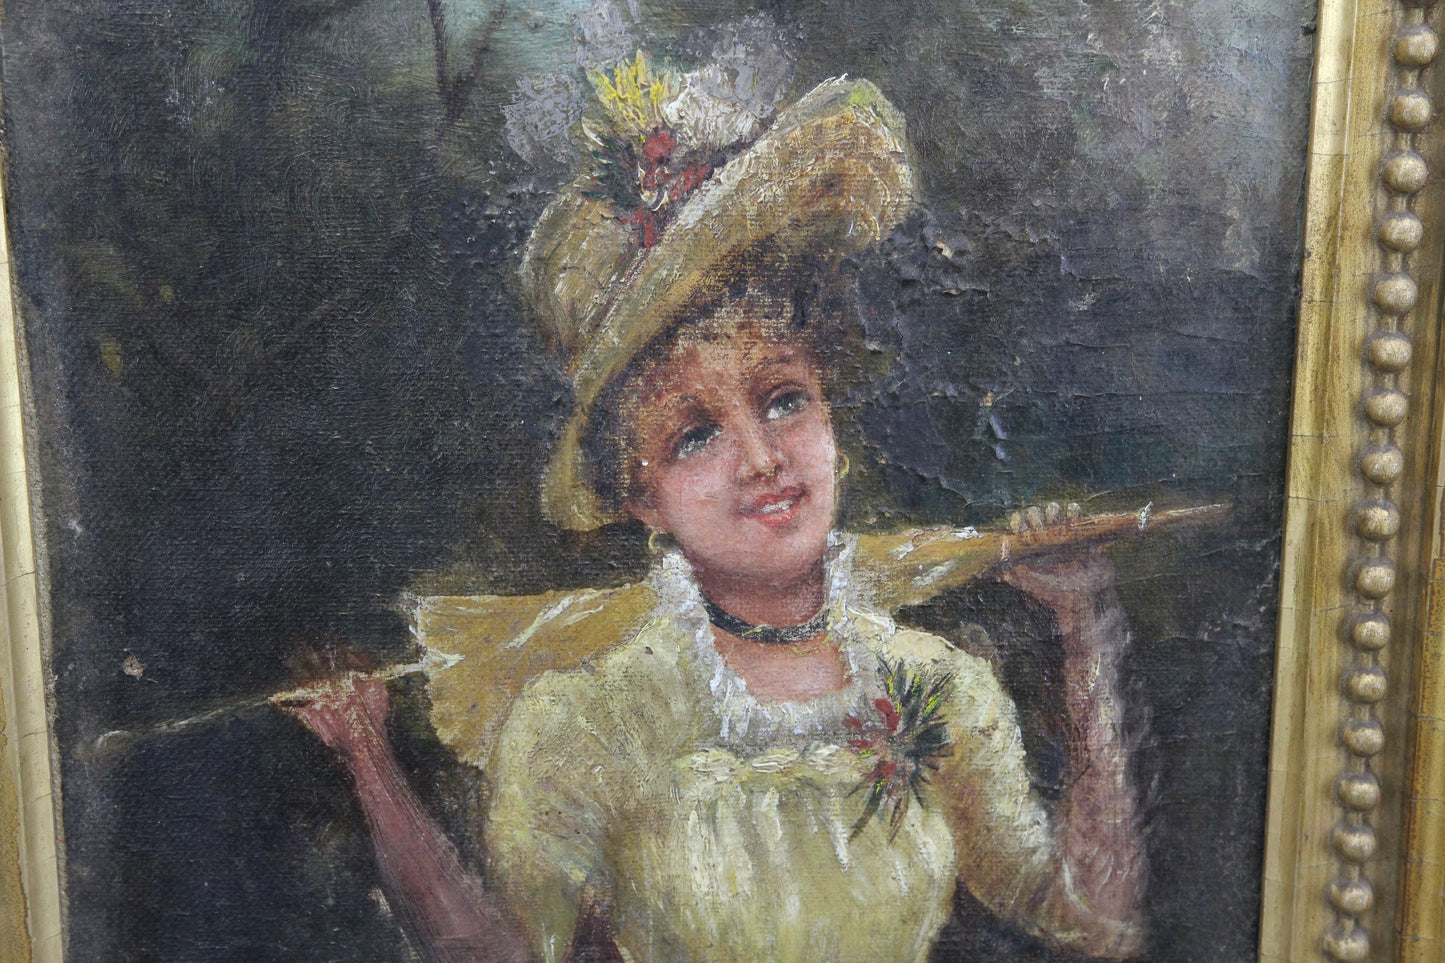 19th Century Oil Painting on Canvas of a Woman in Ornate Wood Frame - 13" x 19"